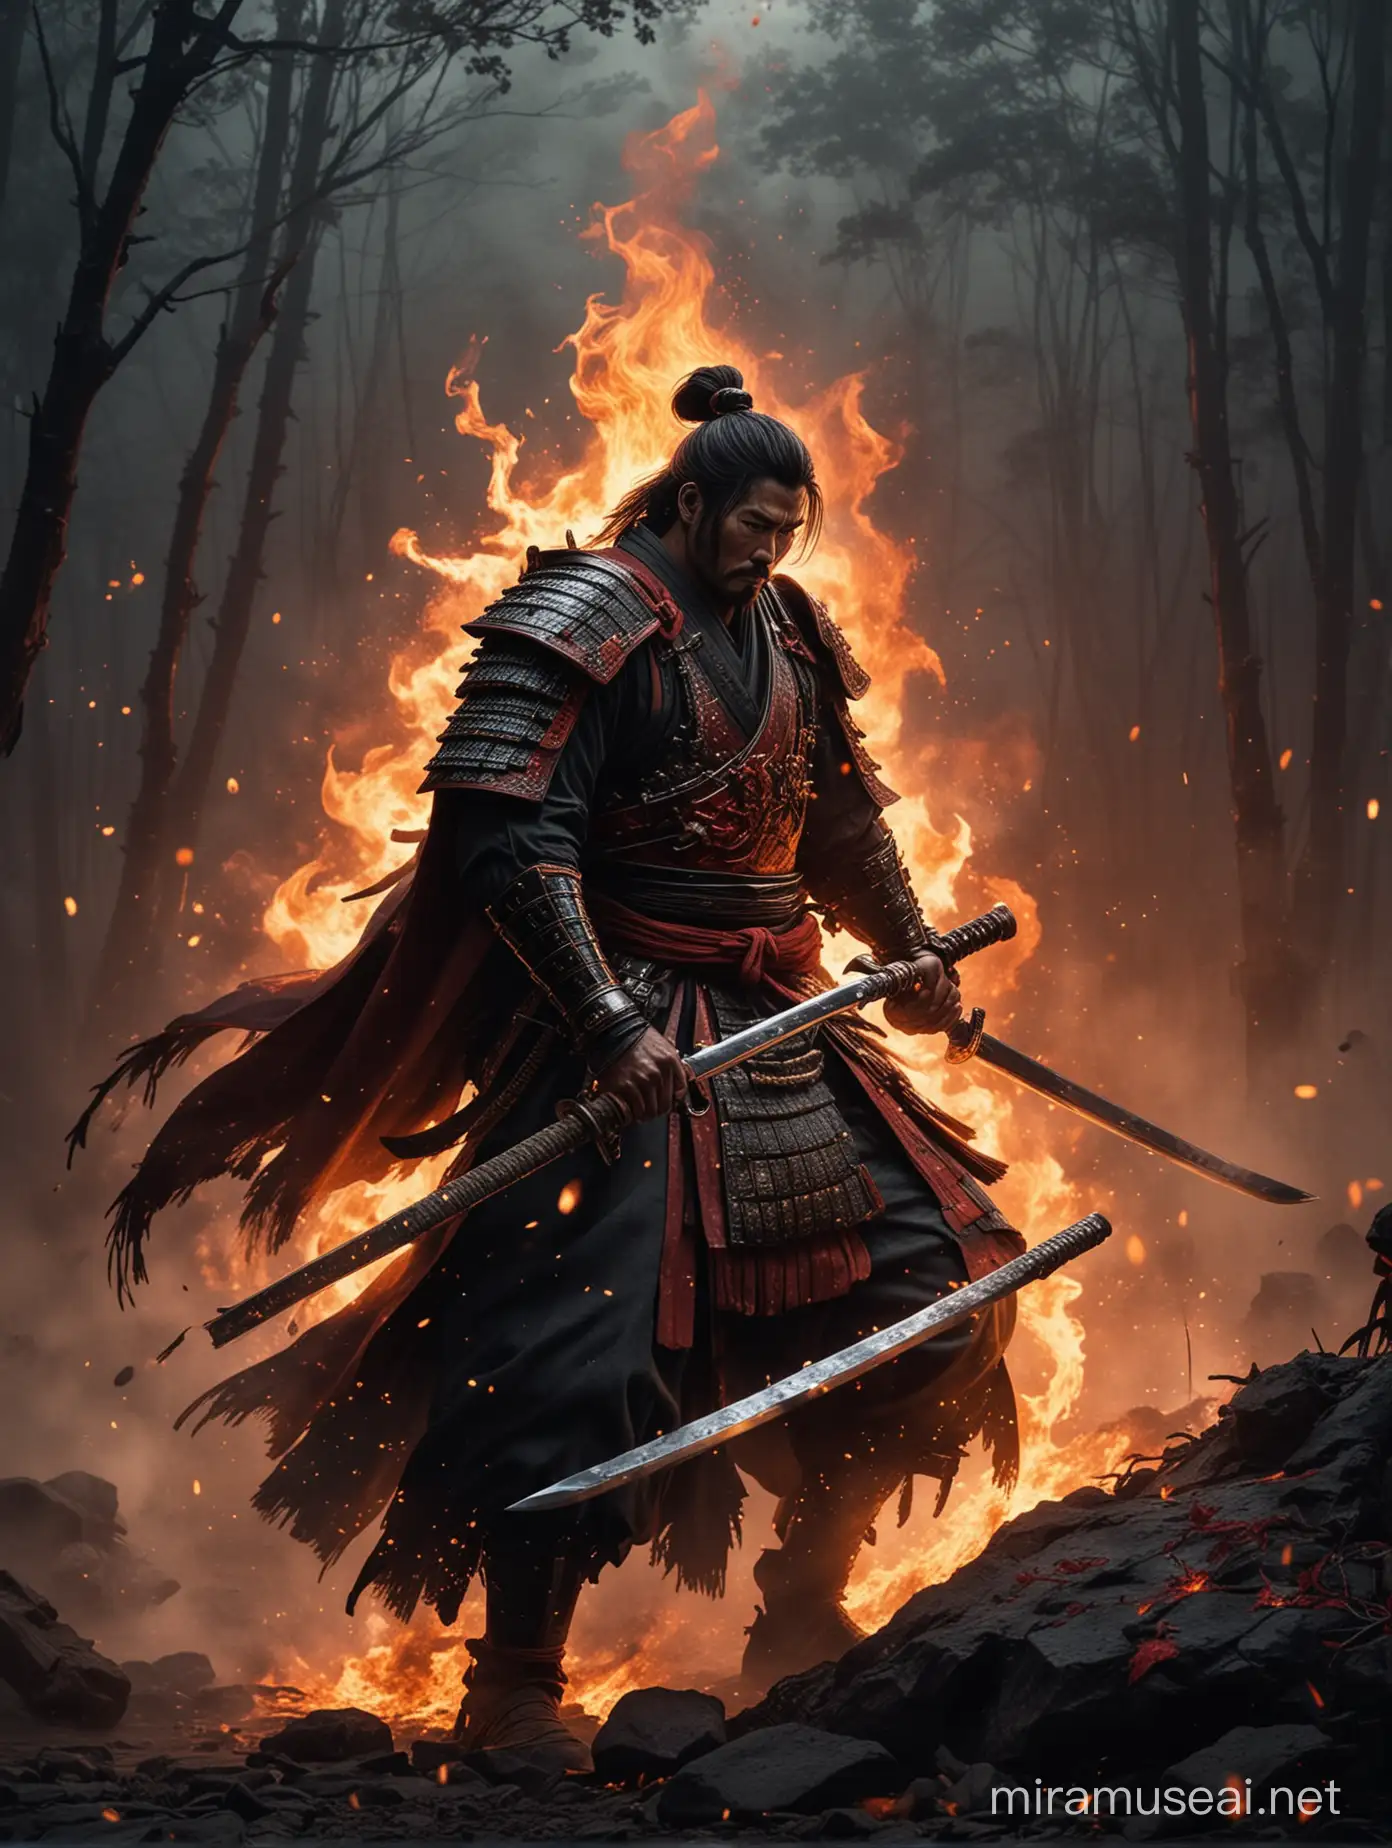 Amidst the swirling mists of a moonlit battlefield, a lone figure emerges, clad in armor of deepest crimson and shadowy black. This is the Samurai of Flames, a warrior whose very presence commands respect and strikes fear into the hearts of his enemies.

His armor, forged from the finest metals and adorned with intricate designs, gleams in the dim light, reflecting the flickering flames that dance across its surface. Each piece is a testament to the craftsmanship of generations past, imbued with the spirit of honor and strength that defines the samurai tradition.

In his hand, the Samurai wields a blade of tempered steel, its edge shimmering with an ethereal glow. With a single stroke, he summons forth the power of fire, the flames licking hungrily at the air as they dance along the length of his blade.

Across the battlefield, his opponent stands, a formidable adversary whose resolve matches his own. But the Samurai does not waver; he is a master of his craft, a warrior trained in the ways of bushido, the samurai code of honor.

With a fierce battle cry, the Samurai charges forward, his sword ablaze with the fury of a thousand suns. His opponent meets him head-on, their weapons clashing with a thunderous roar that echoes through the night.

But the Samurai is undeterred; he fights with the skill and precision of a true master, his every movement calculated and deliberate. With each strike, he unleashes the power of fire, the flames consuming his enemies with a relentless fury.

As the battle rages on, the Samurai remains resolute, his determination unyielding even in the face of overwhelming odds. For he knows that he fights not just for victory, but for honor and justice, ideals that are worth any sacrifice.

And so, with fire in his heart and steel in his hand, the Samurai of Flames continues to fight, a beacon of courage and strength in a world consumed by darkness.